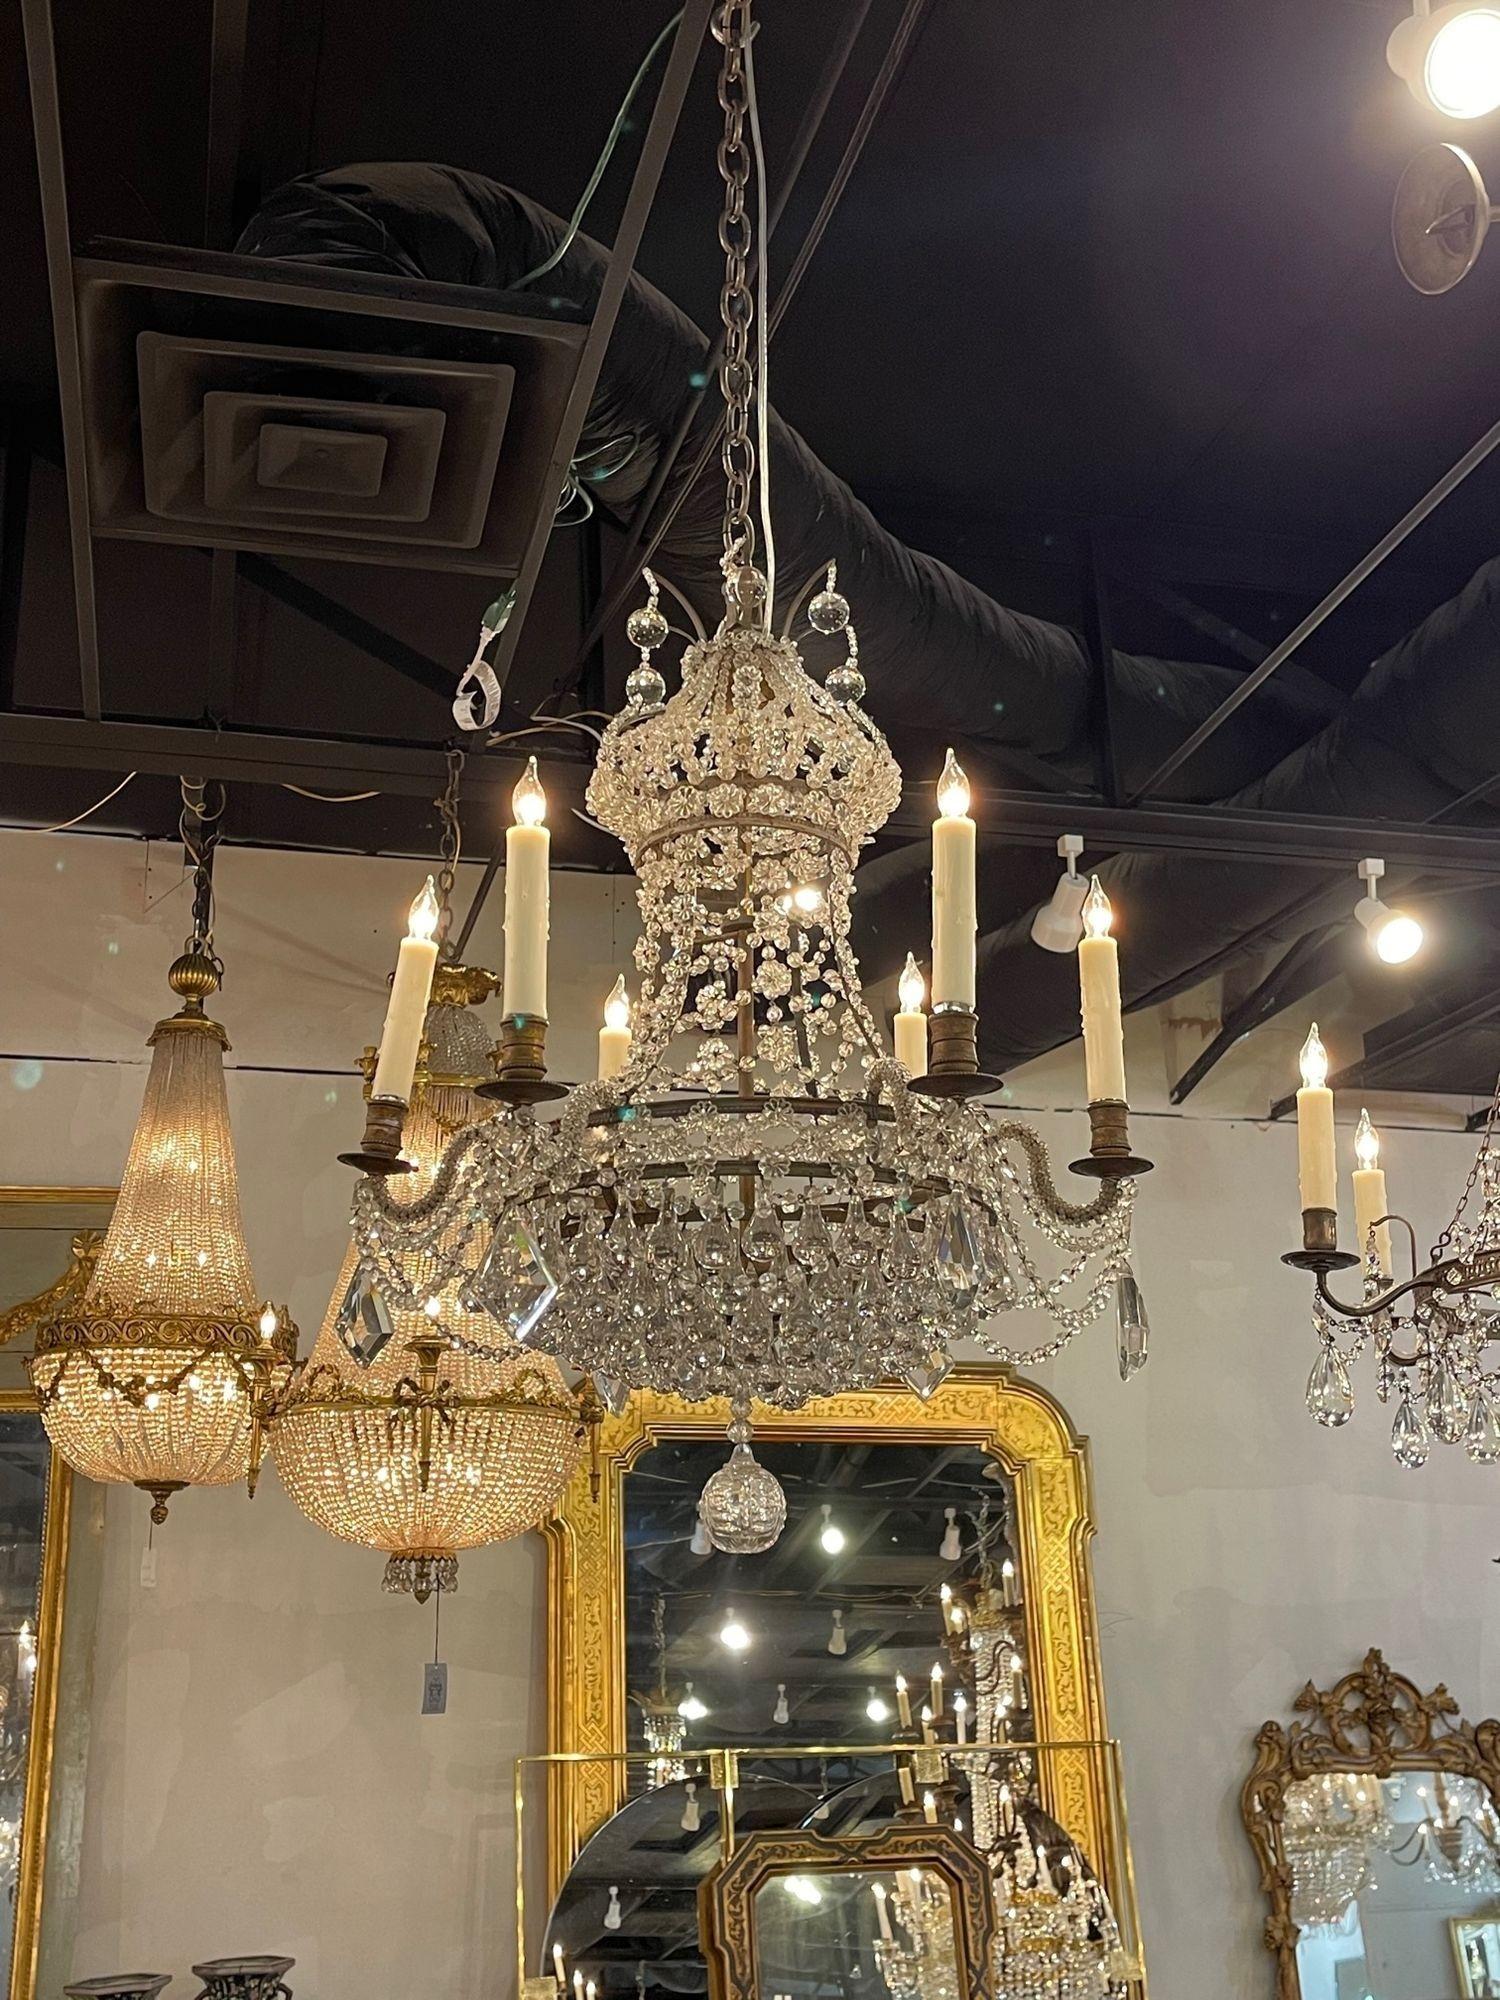 Very fine vintage French Bagues bronze and beaded chandelier with 6 lights. Featuring gorgeous beads and crystals some in the shape of a flower. Pretty scale and shape on this piece as well. Exquisite!

